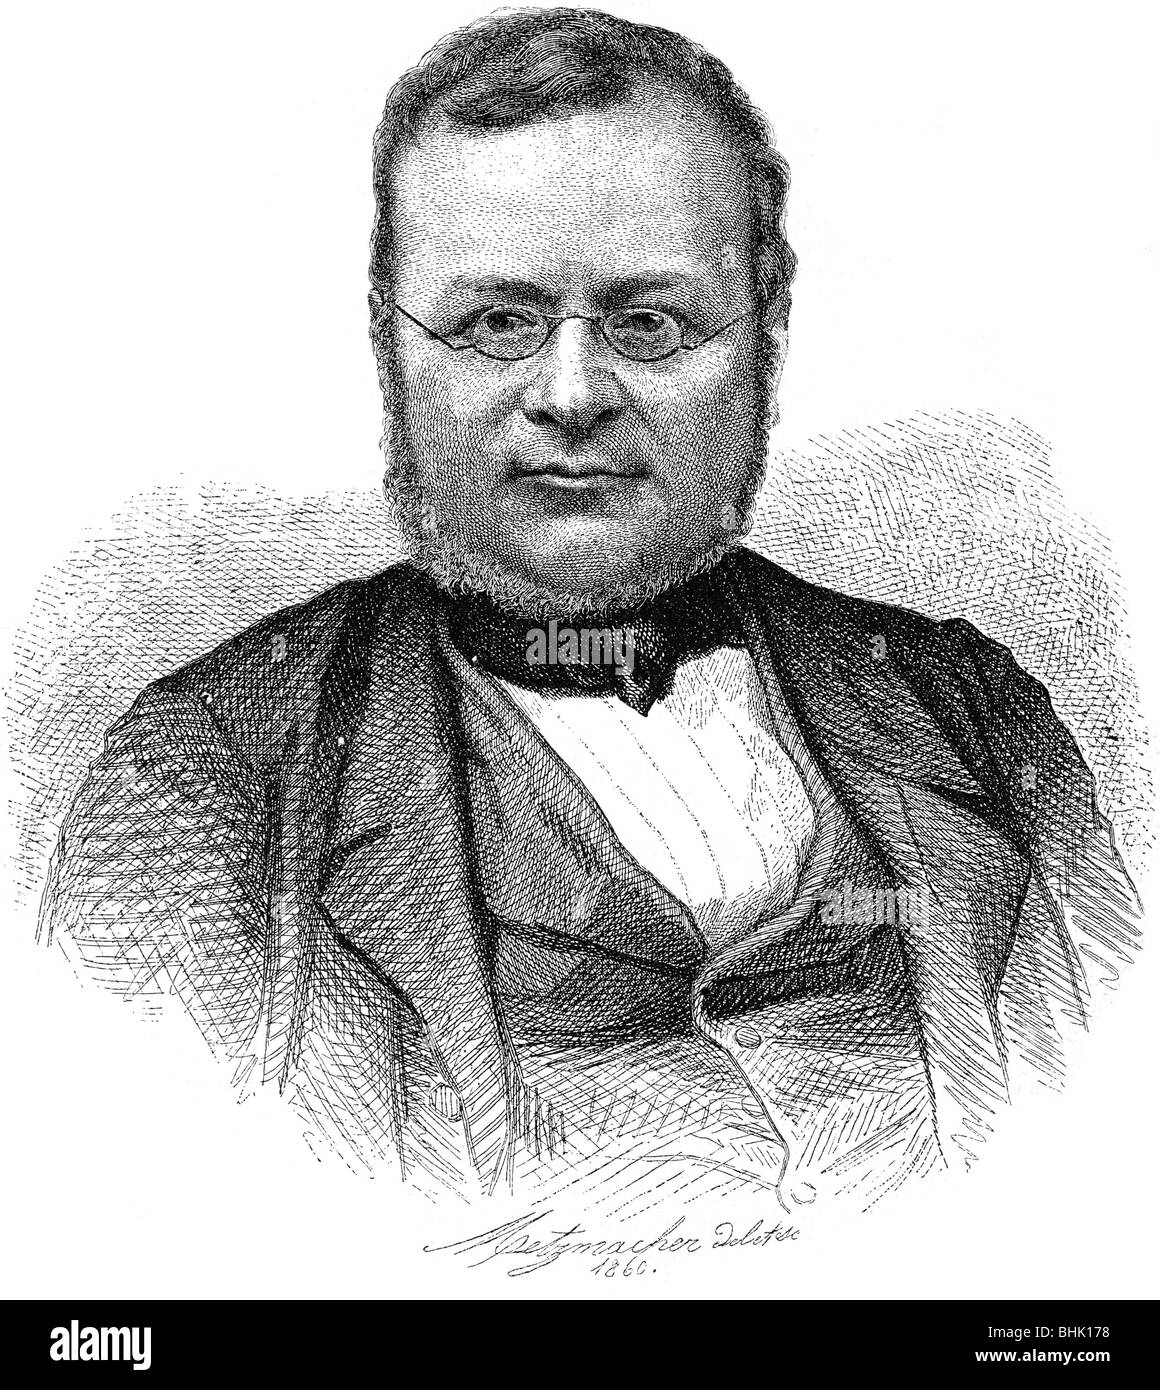 Cavour, Camillo, Count of, 10.8.1810 - - 6.6.1861, Italian politician, Prime Minster of the Kingdom of Sardinia 1852 - 1859 and 1860 - 1861, portrait, wood engraving by Metzmacher, 1860, , Stock Photo